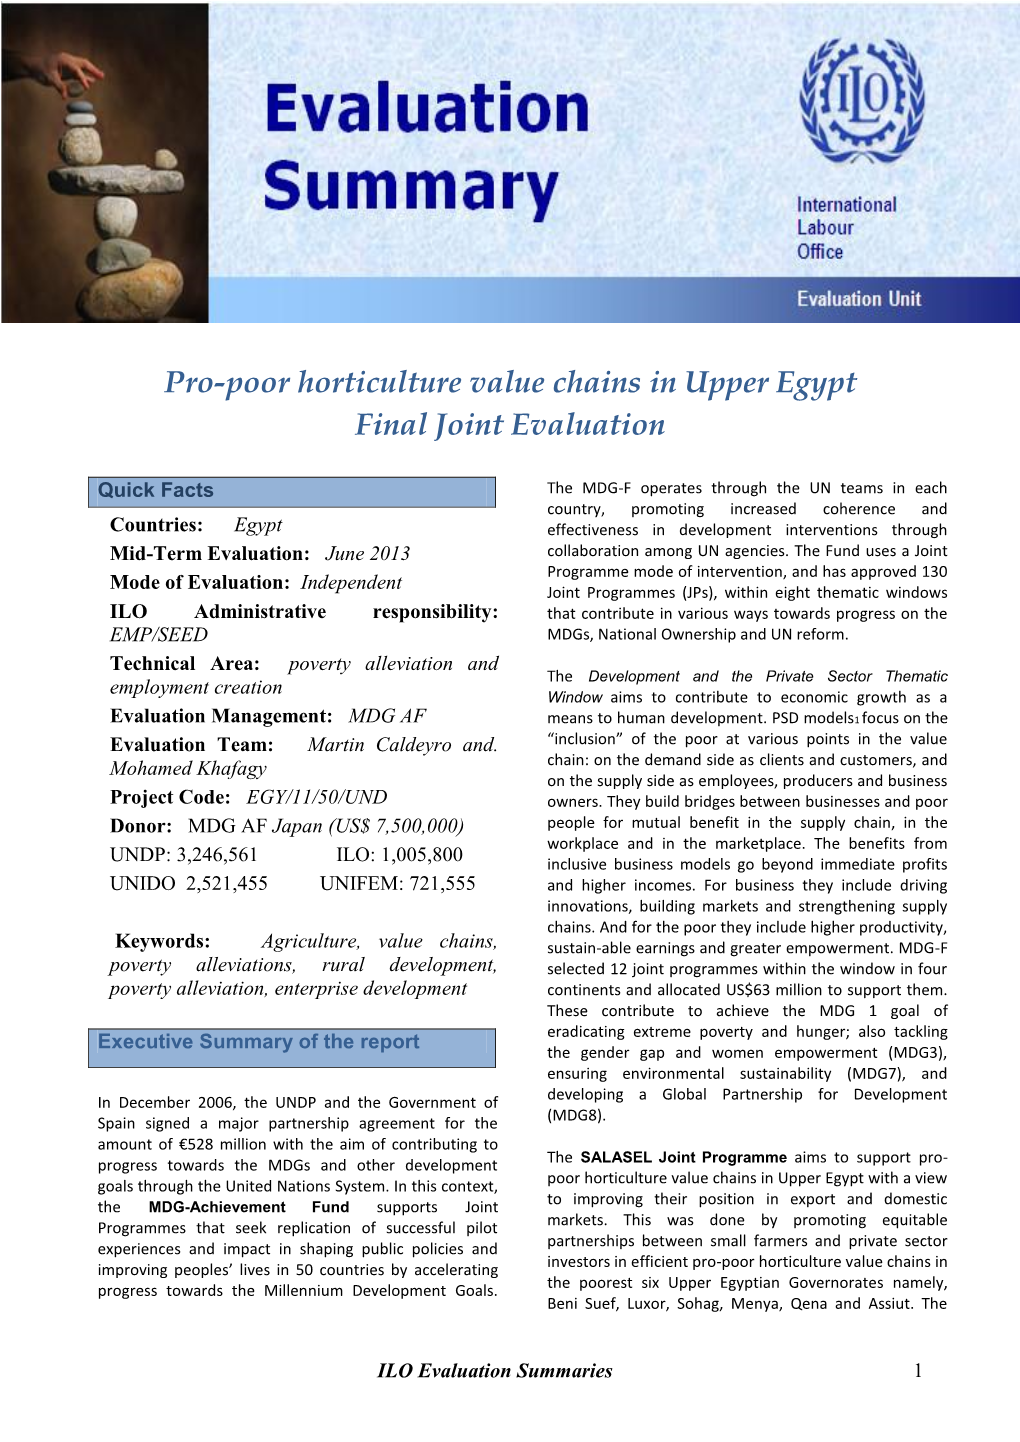 Pro-Poor Horticulture Value Chains in Upper Egypt Final Joint Evaluation